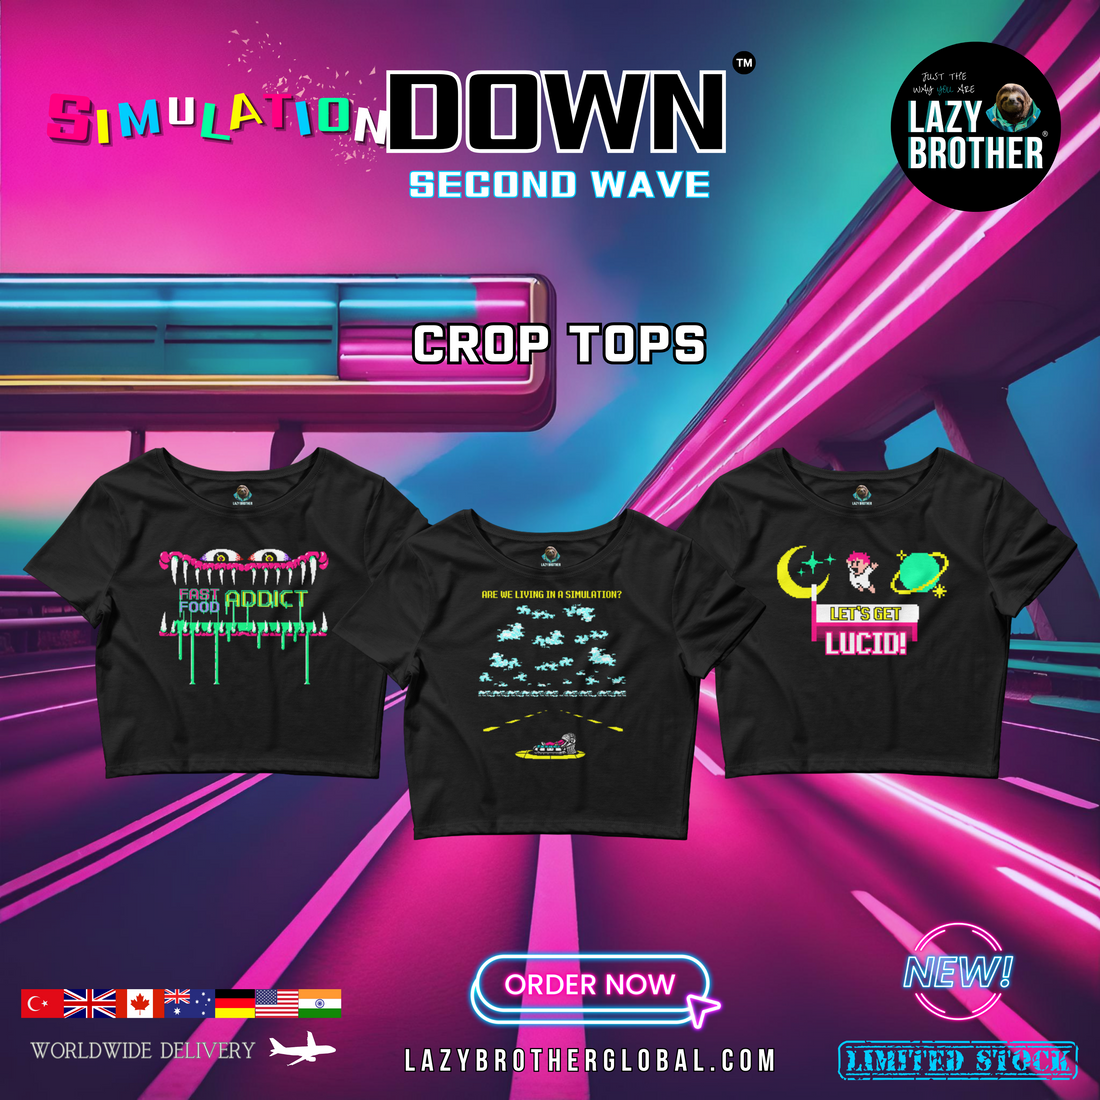 A Wave of Innovation: Simulation Down Second Wave Crop Tops!